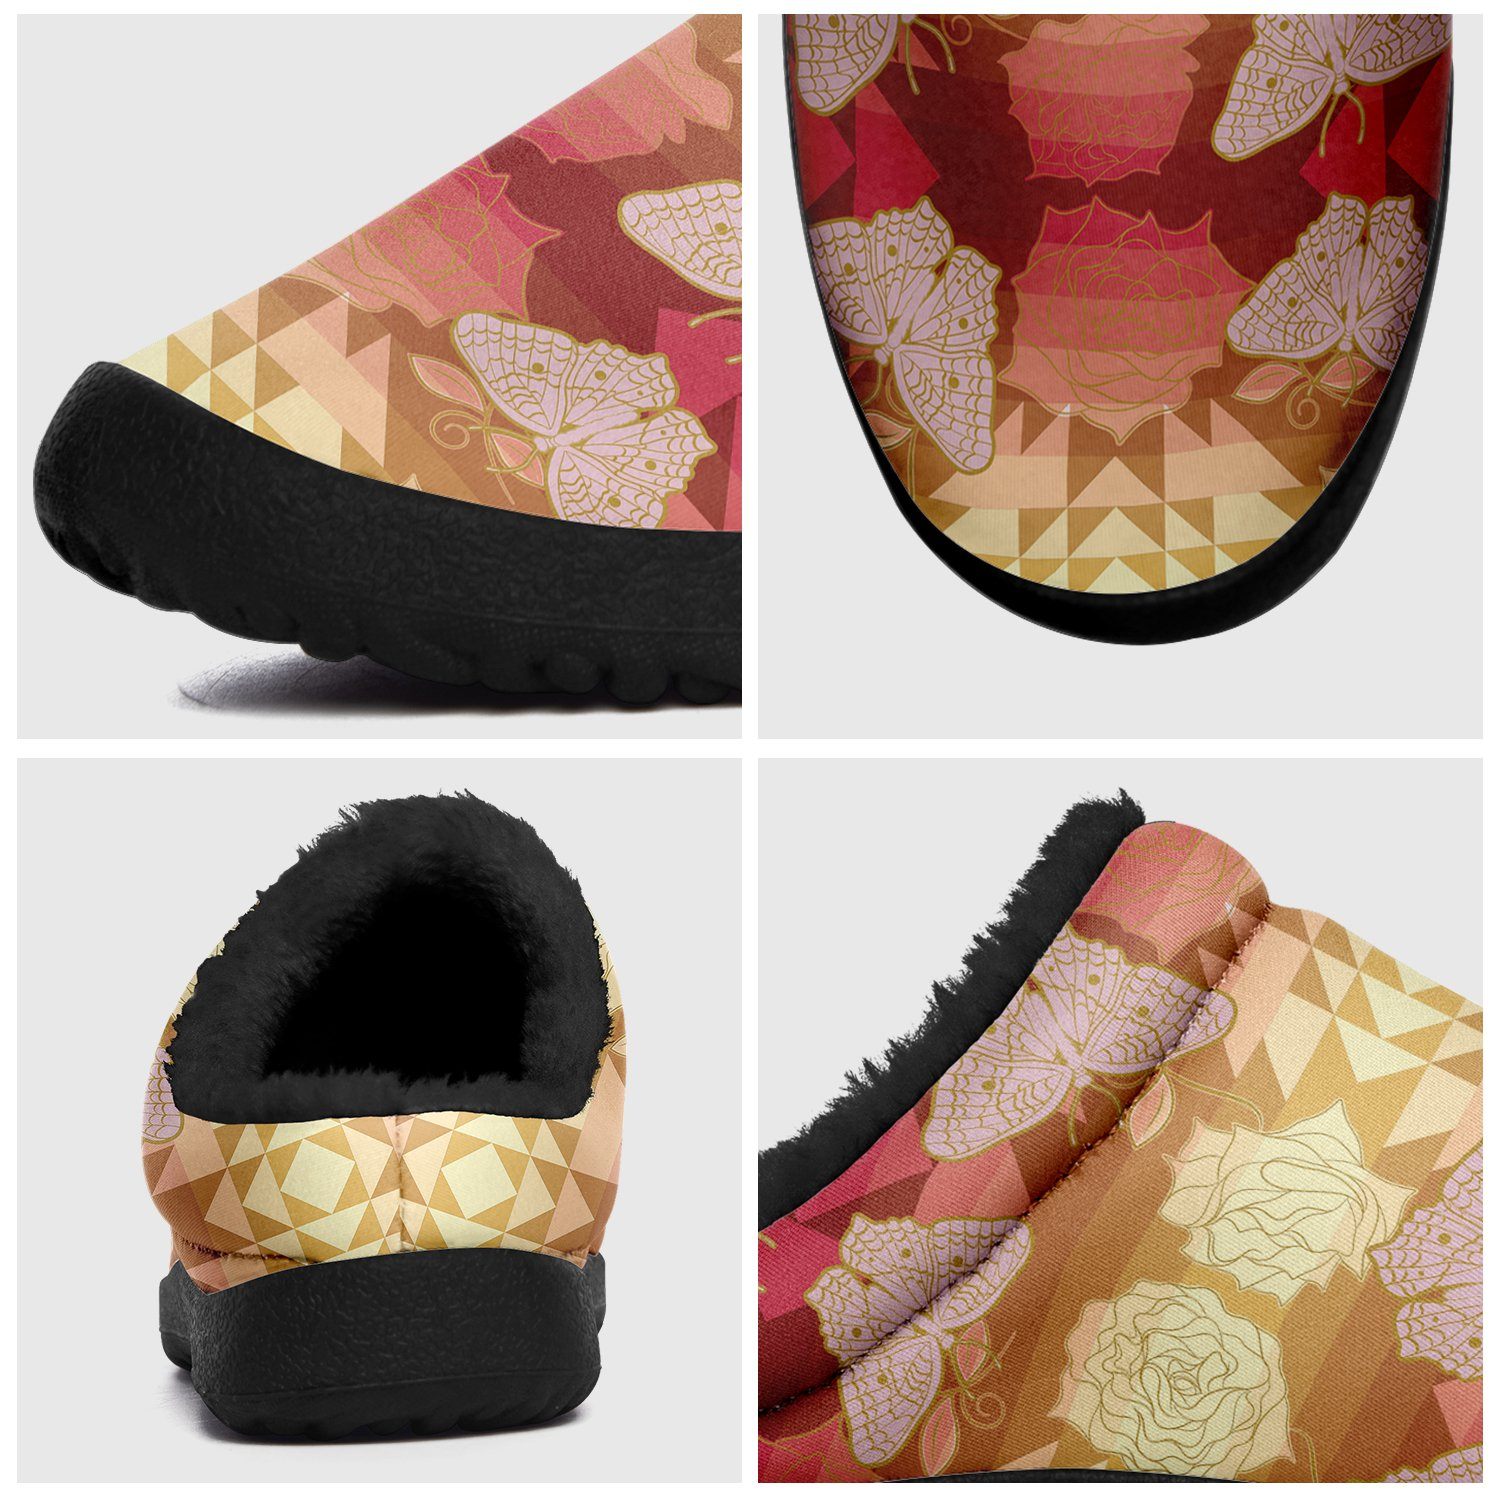 Butterfly and Roses on Geometric Ikinnii Indoor Slipper 49 Dzine 